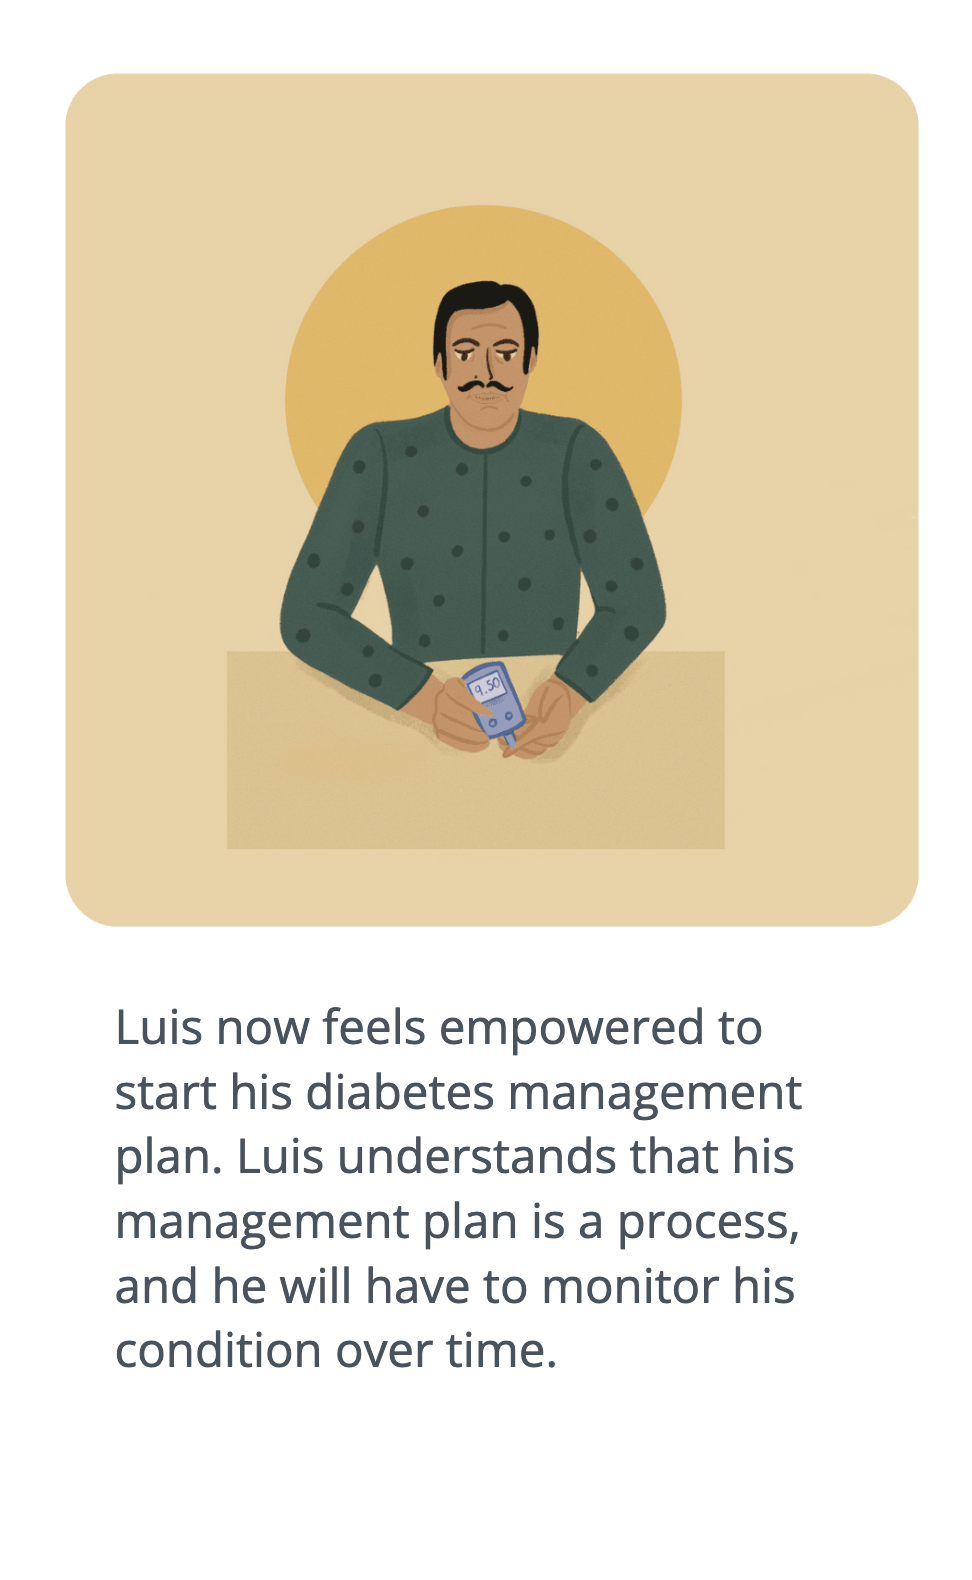 man holding blood glucose monitor. card reads: "Luis now feels empowered to start his diabetes management plan. Luis understands that his management plan is a process, and he will have to monitor his condition over time."